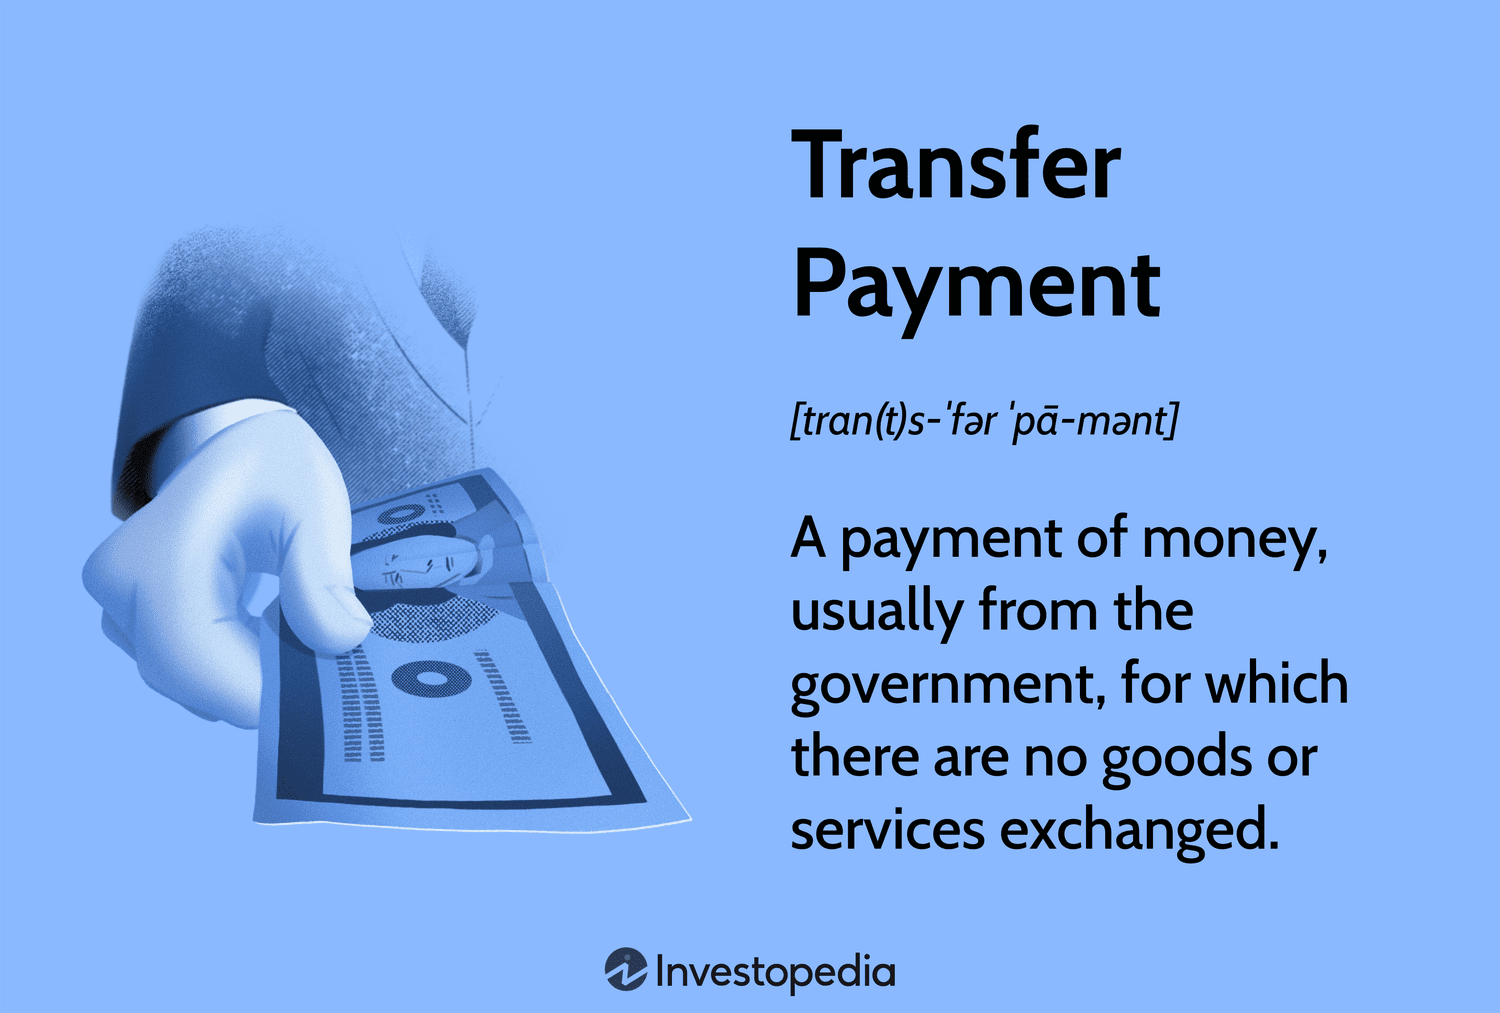 Transfer Payment: A payment of money, usually from the government, for which there are no goods or services exchanged.